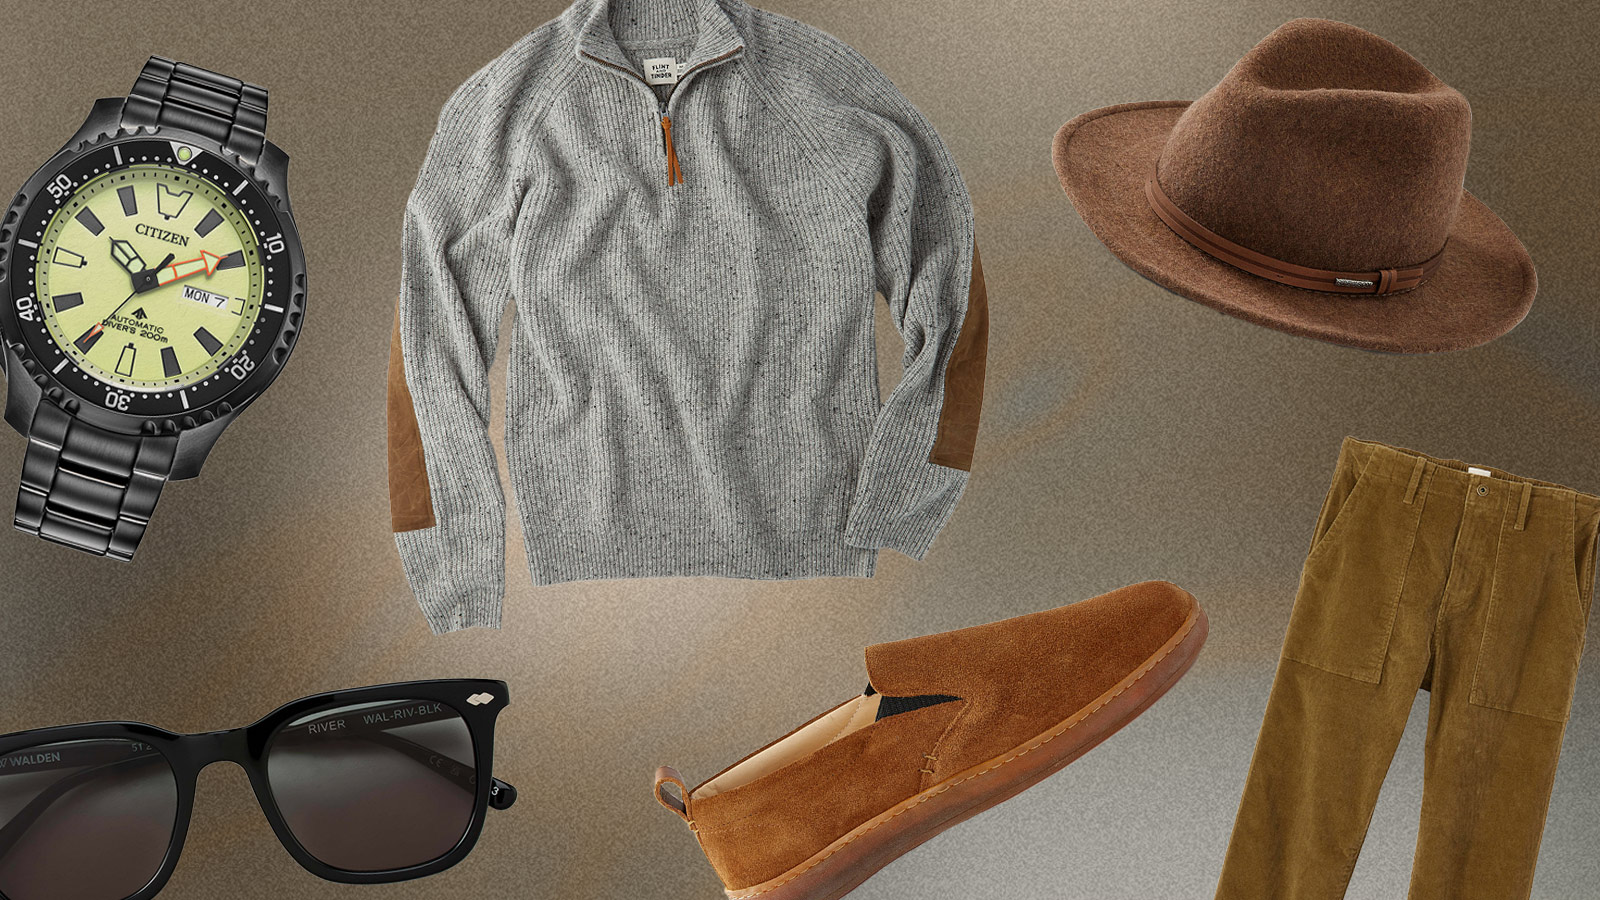 Huckberry's "See You Out There" End of Year Sale